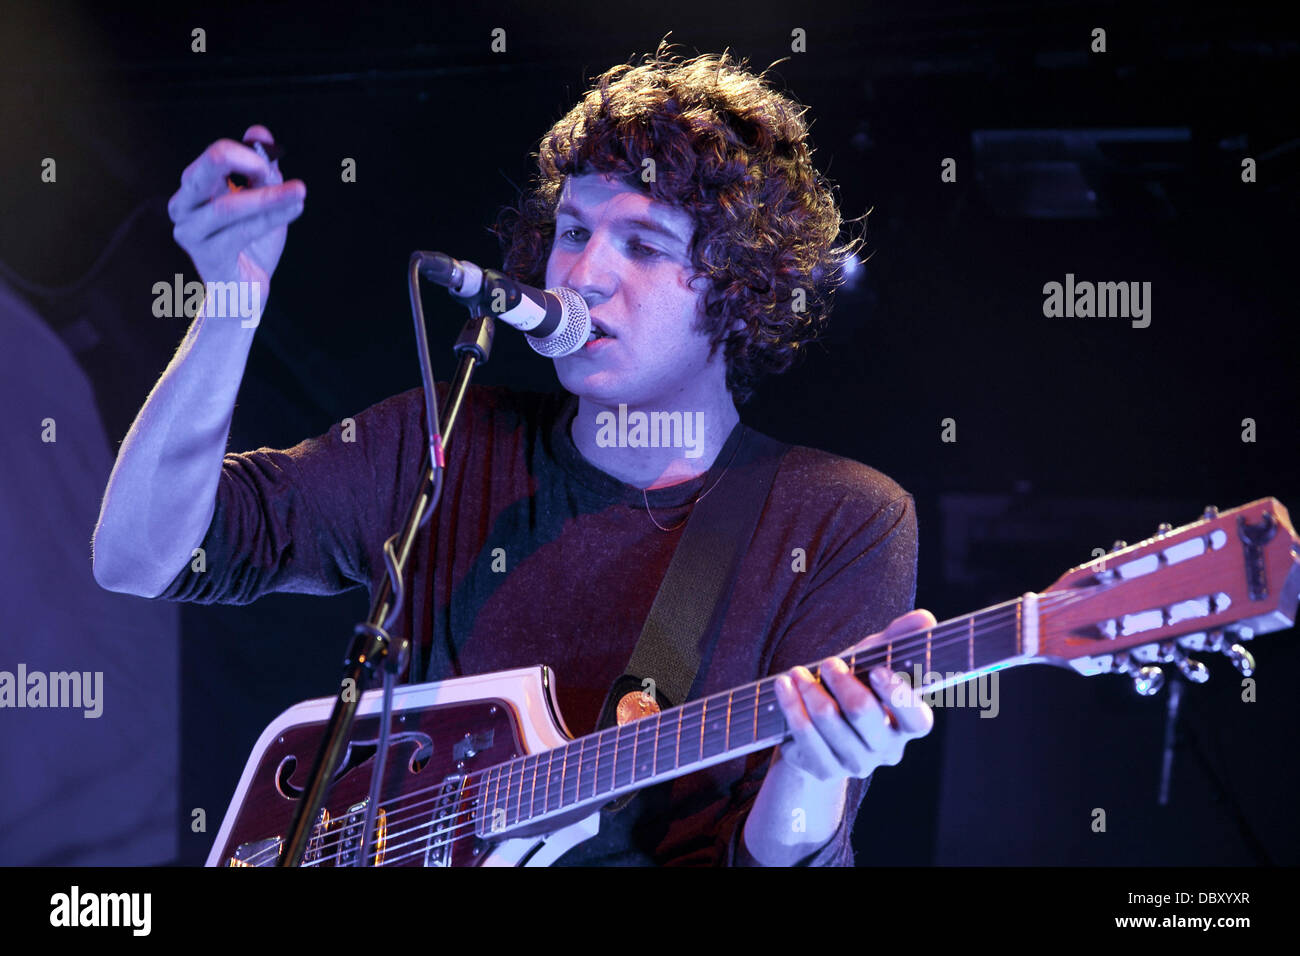 Luke Pritchard of The Kooks performing live in concert at la Fleche d'Or Paris, France - 07.09.11 Stock Photo